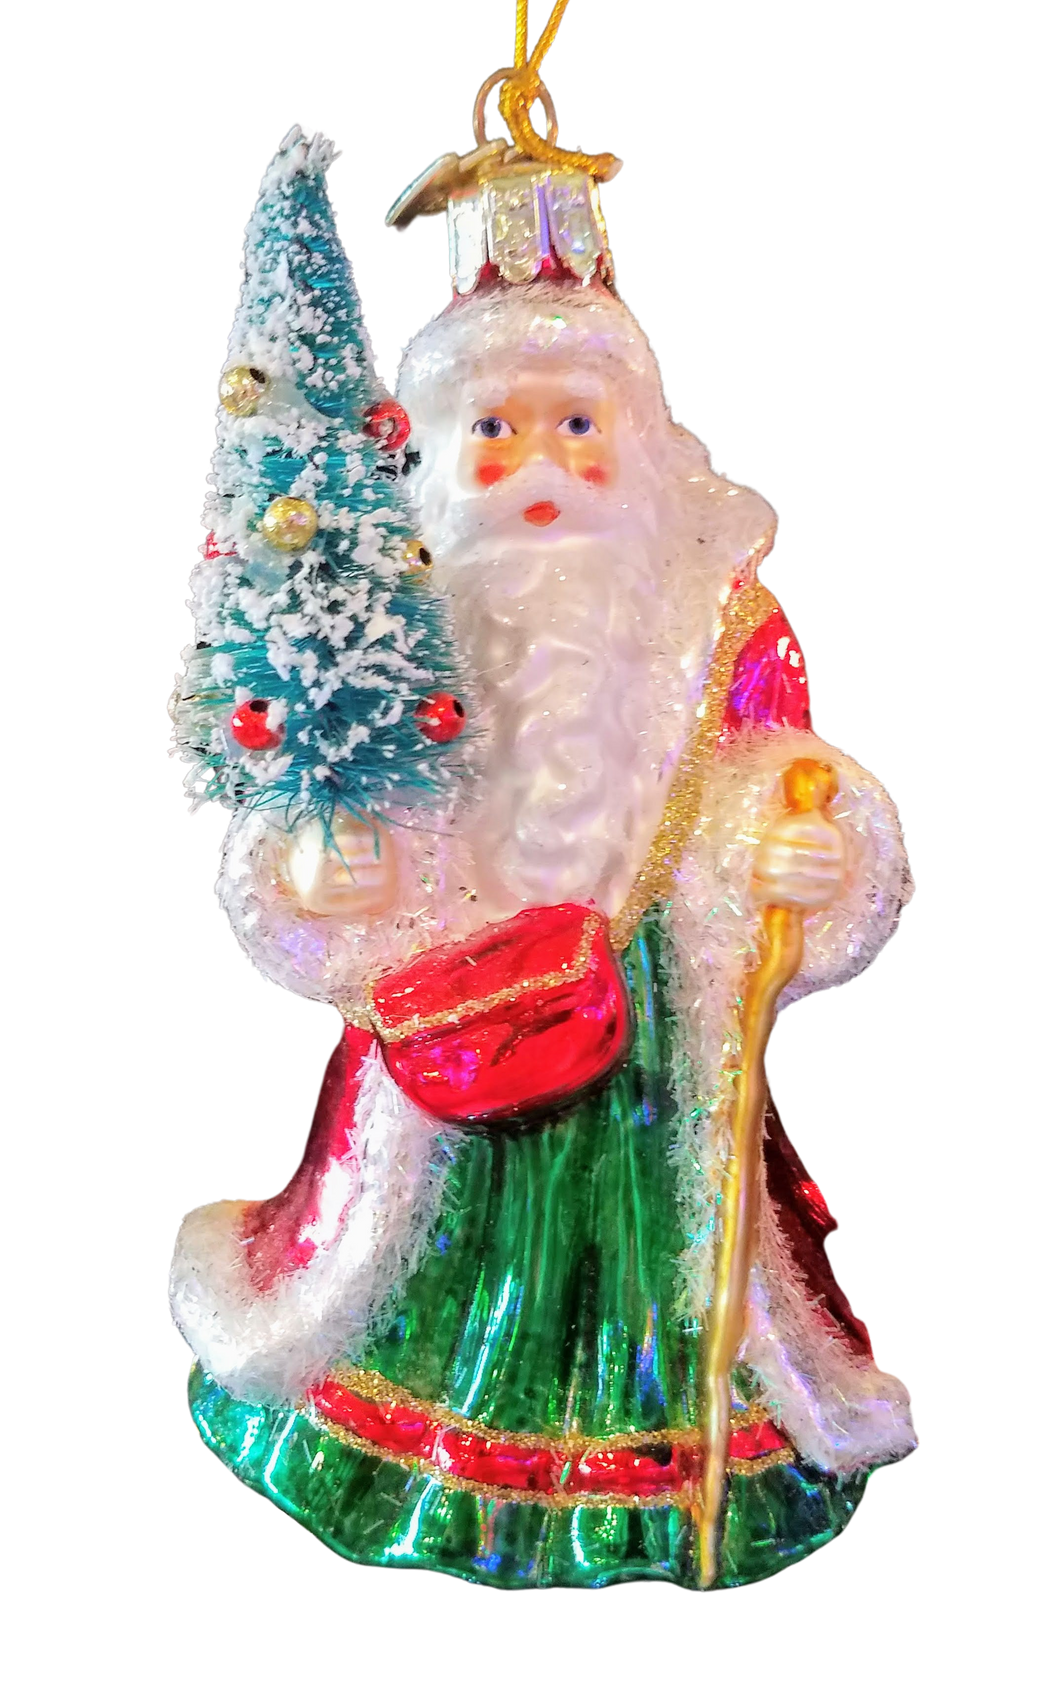 Glass noble gems Santa ornament with tree 5.5